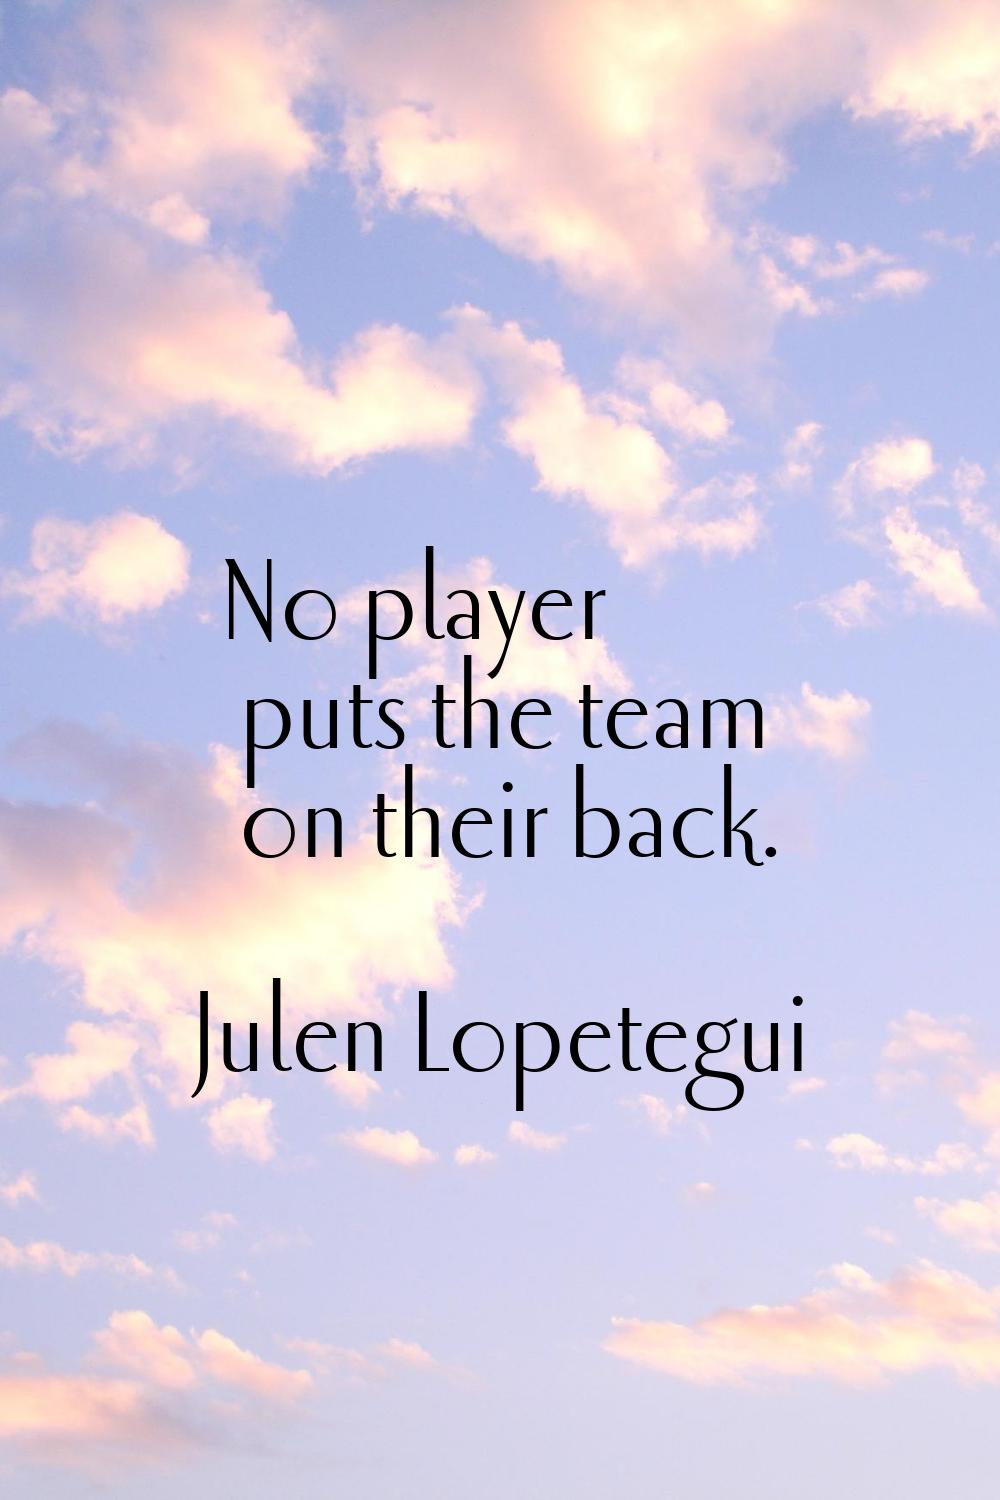 No player puts the team on their back.